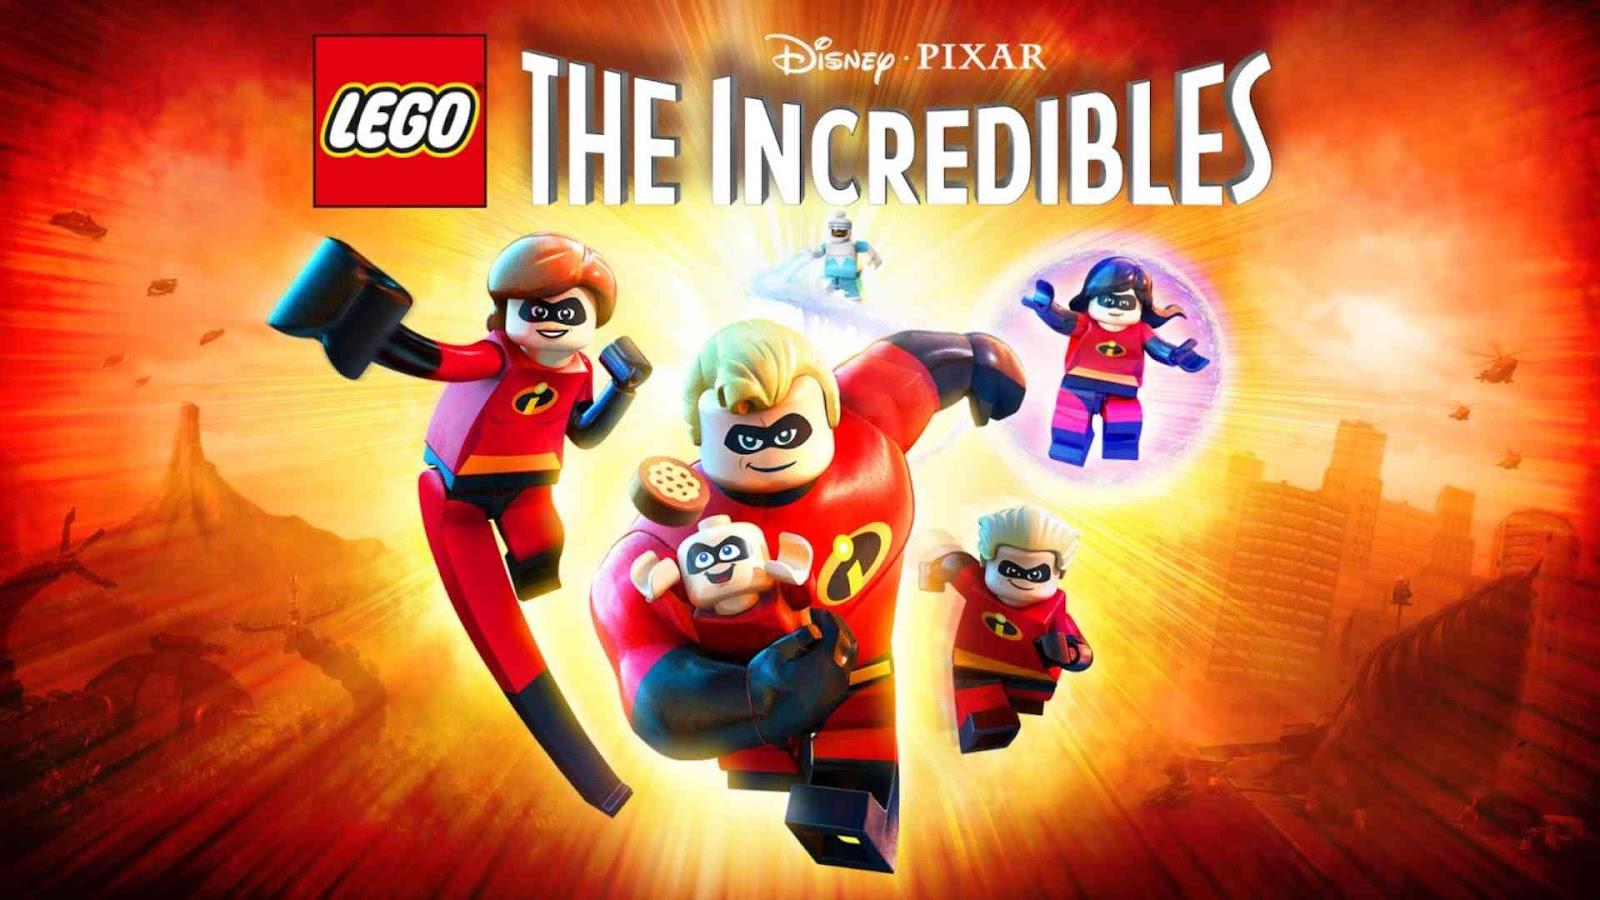 16.LEGO The Incredibles